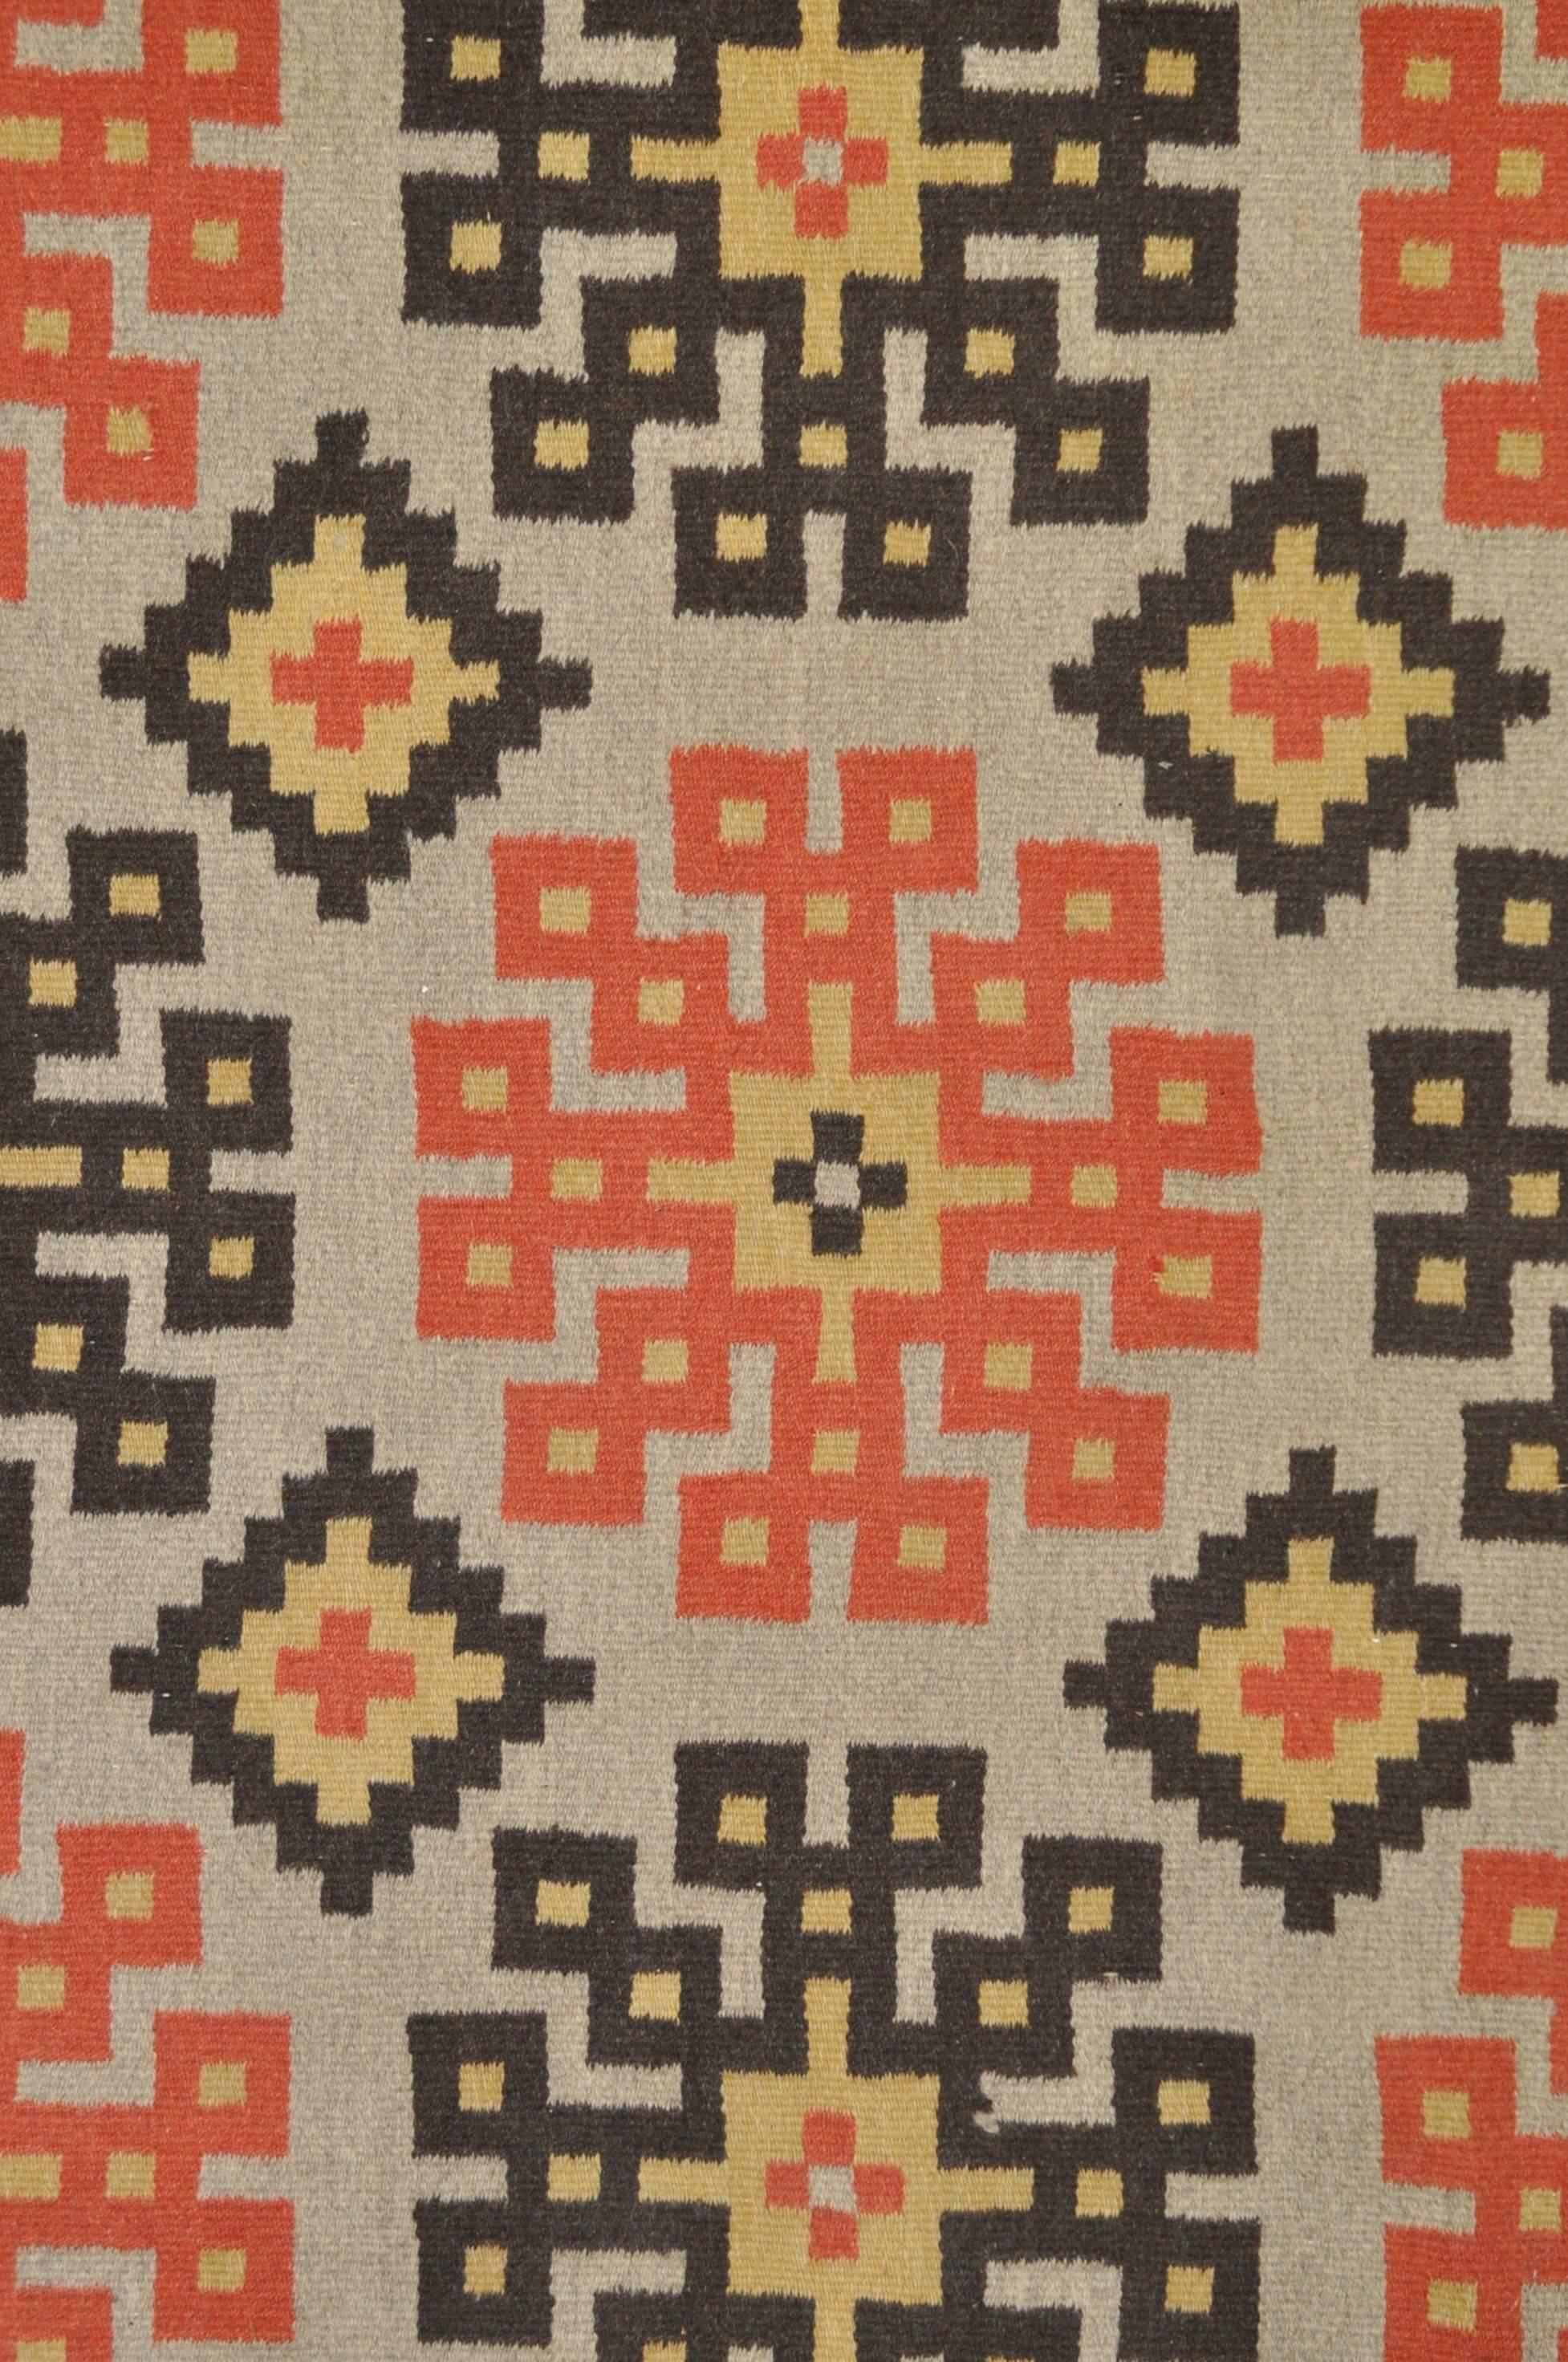 We believe this simple snowflake Kilim to be of Norther European design and make.
The delightful modest design coupled with earthy tonal arrangement recalls Swedish Folk Art tapestry.
The weaving may be used as a wall hanging or floor as seen